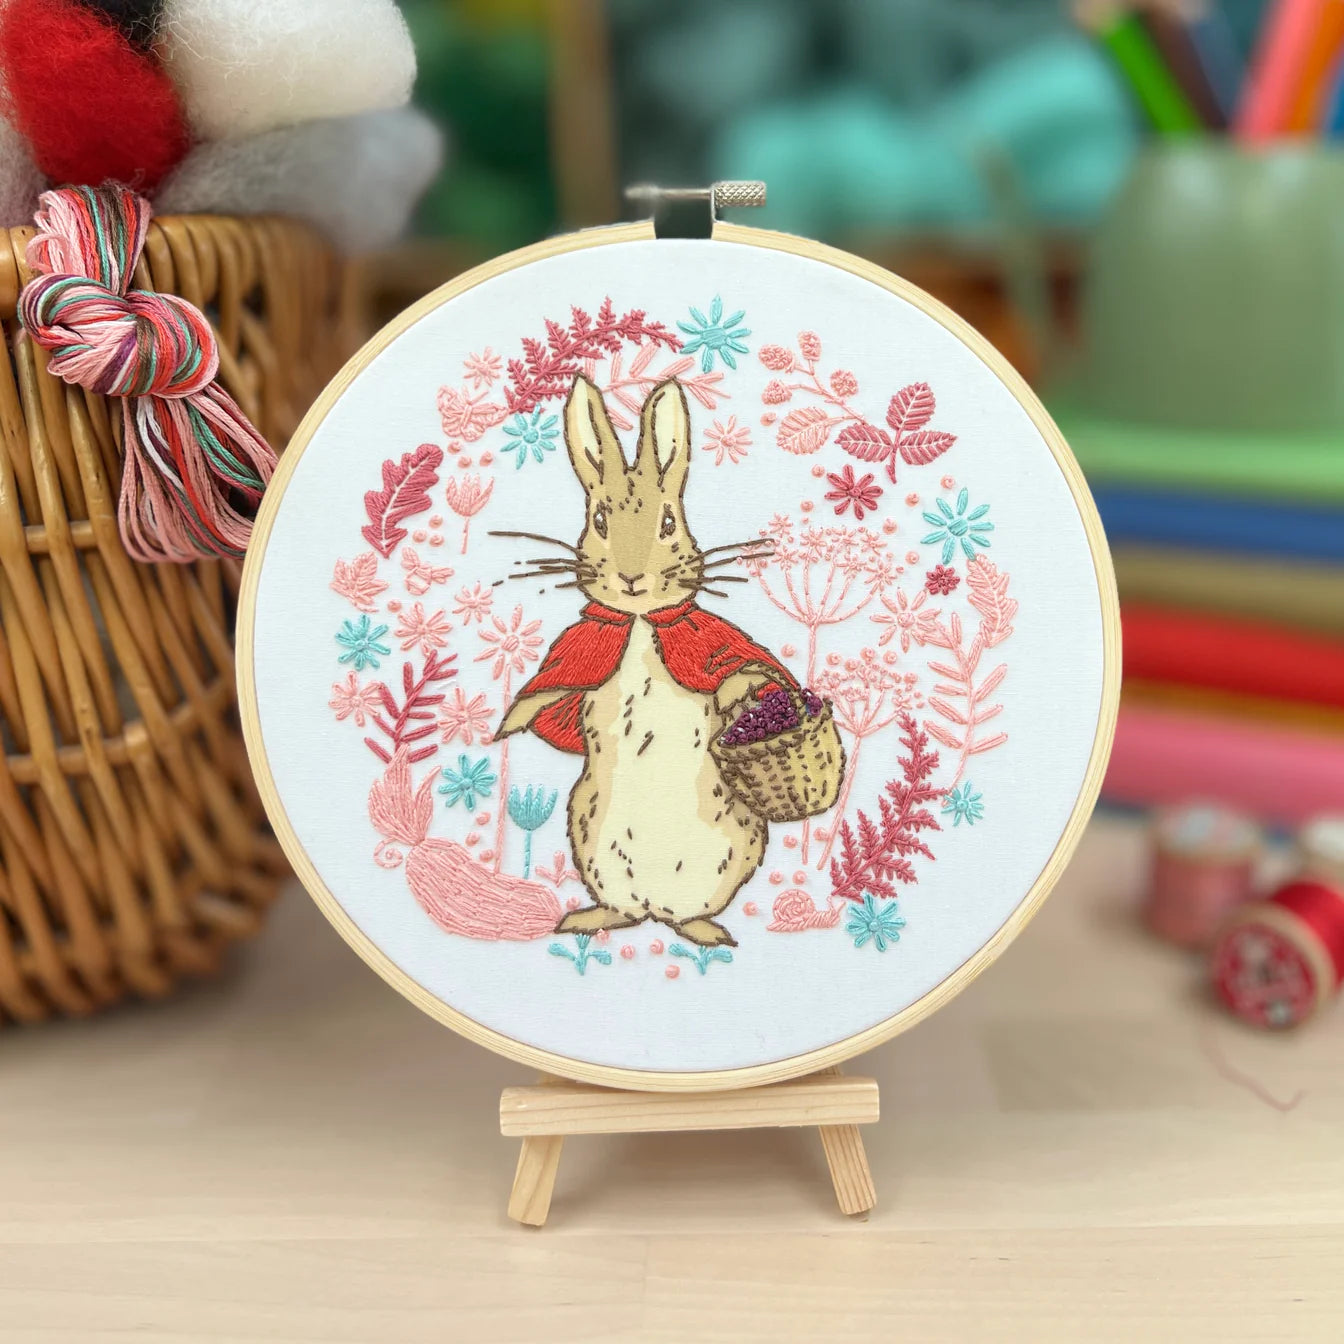 Flopsy Bunny Embroidery Kit from The Crafty Kit Company